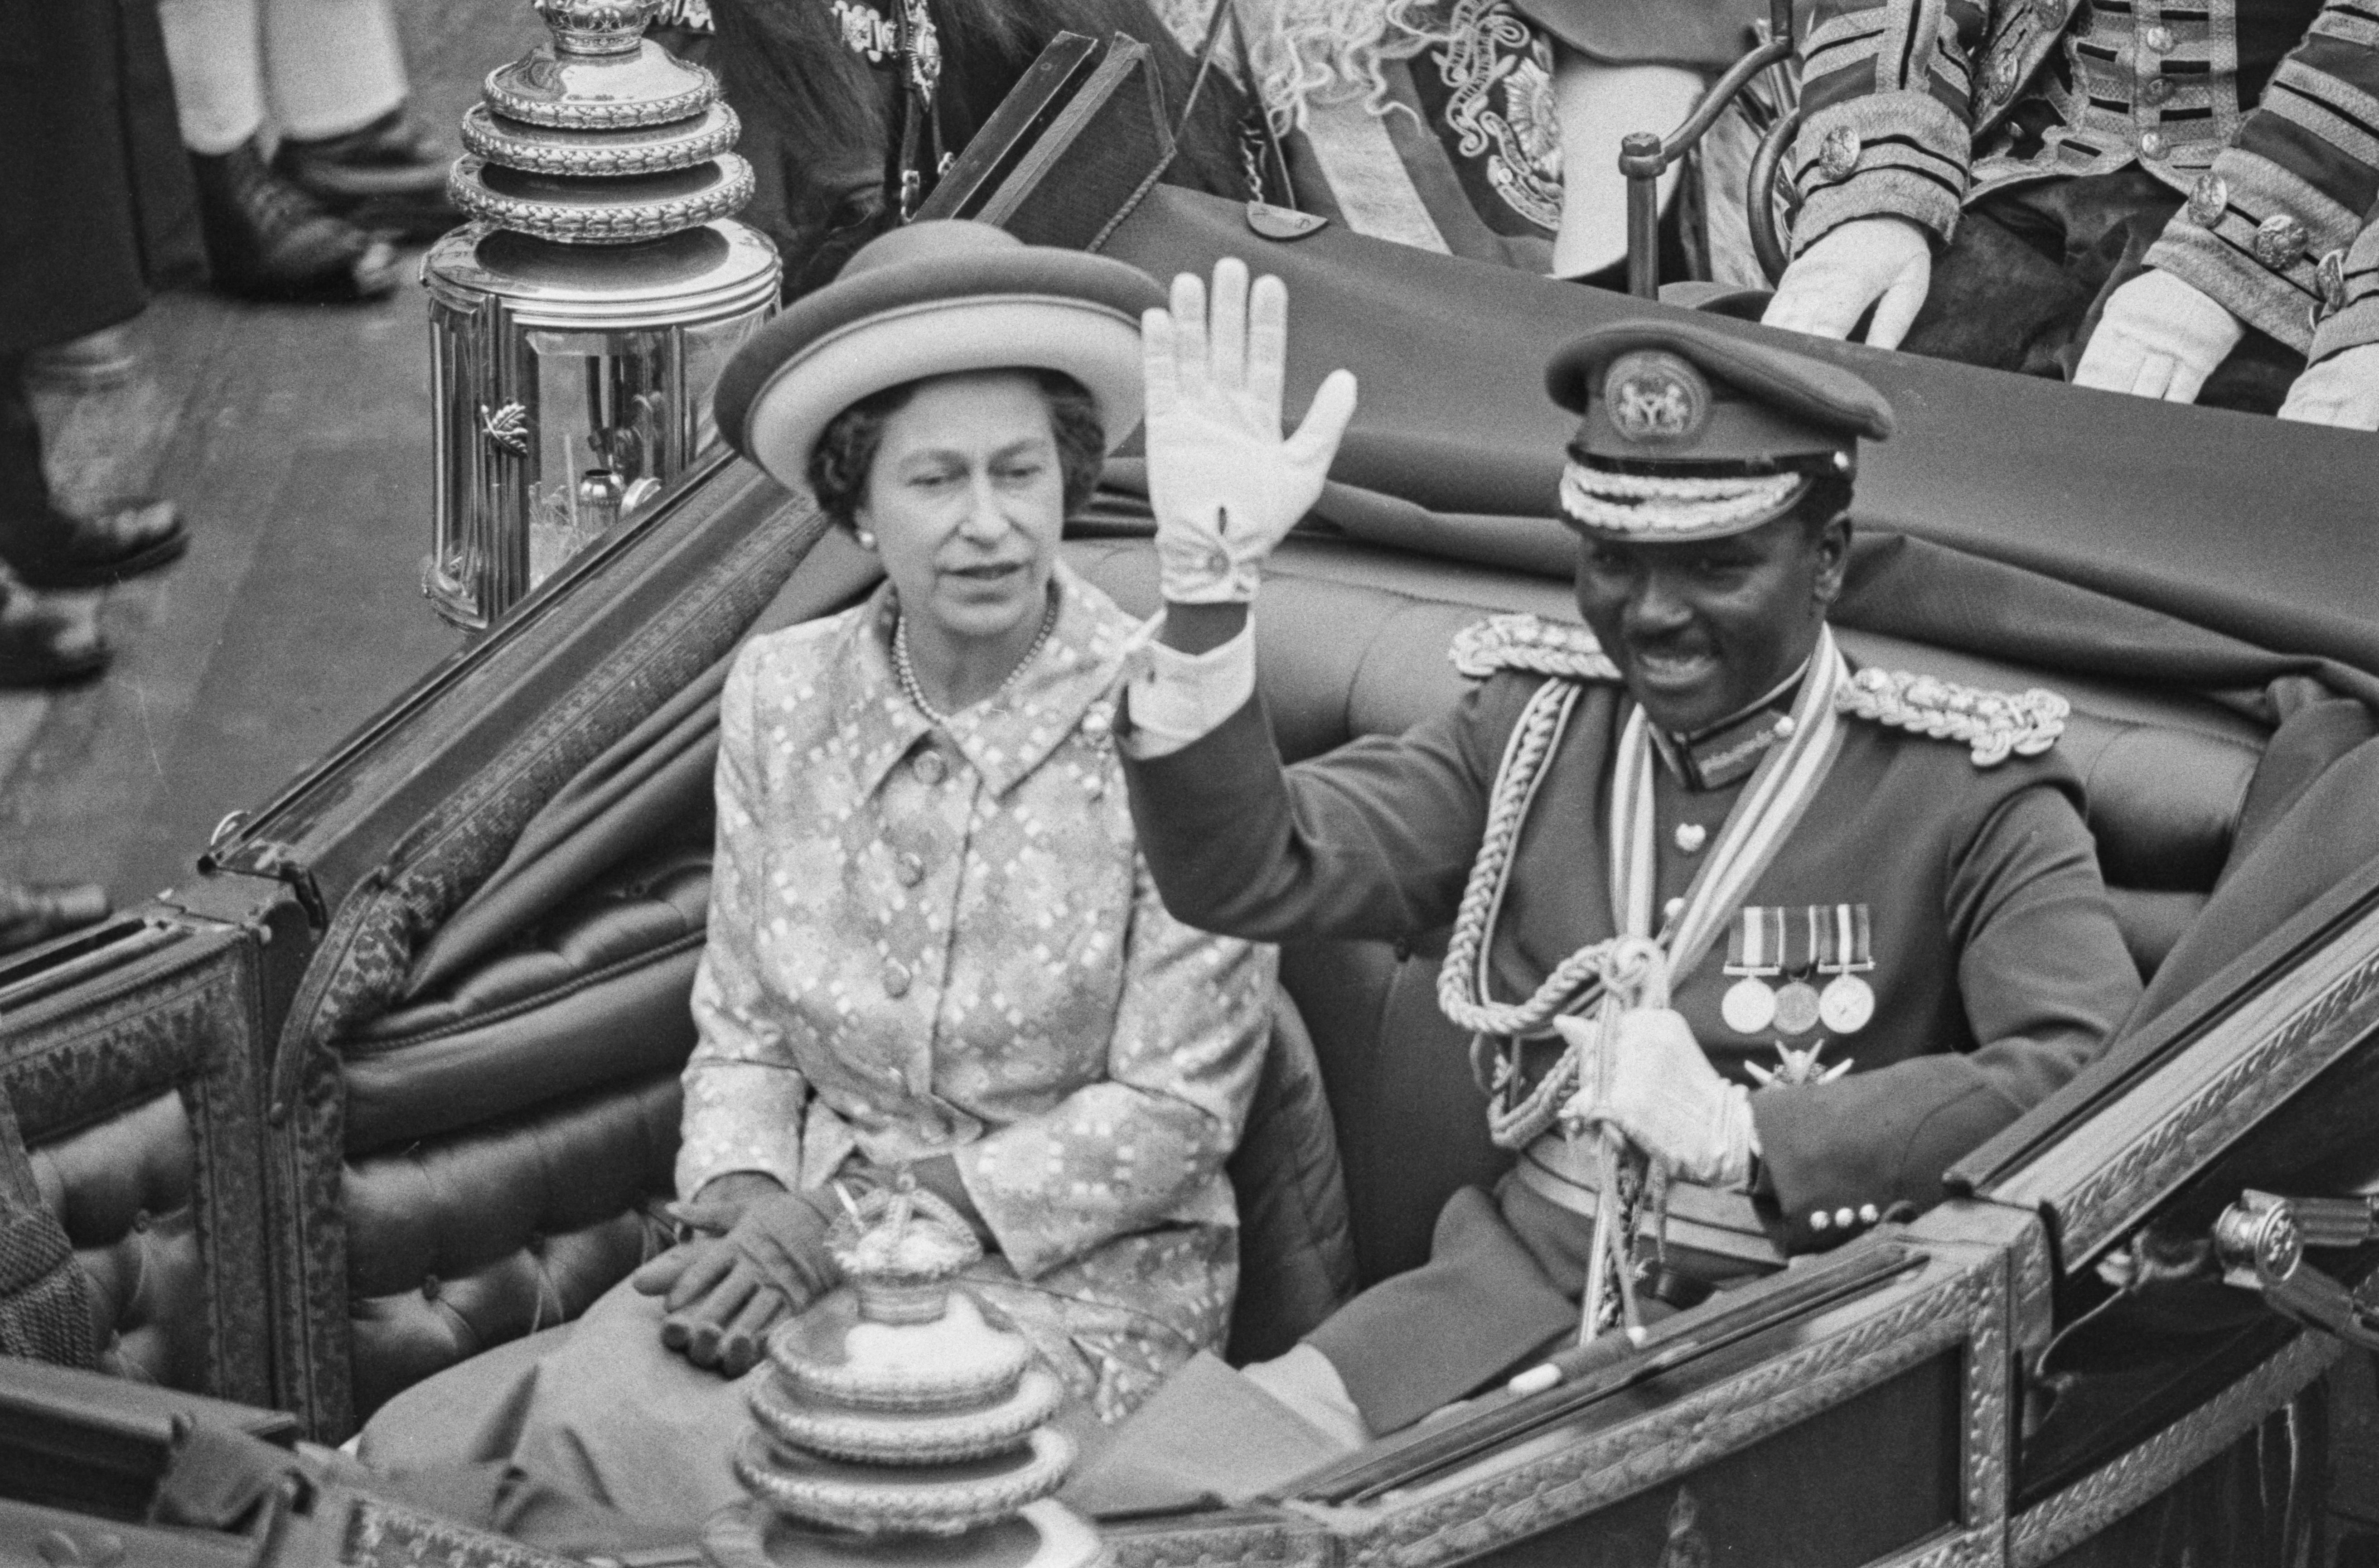 An image of Nigerian Head of State Yakubu Gowon riding with Queen Elizabeth II in a chariot in London, UK, June 1973.